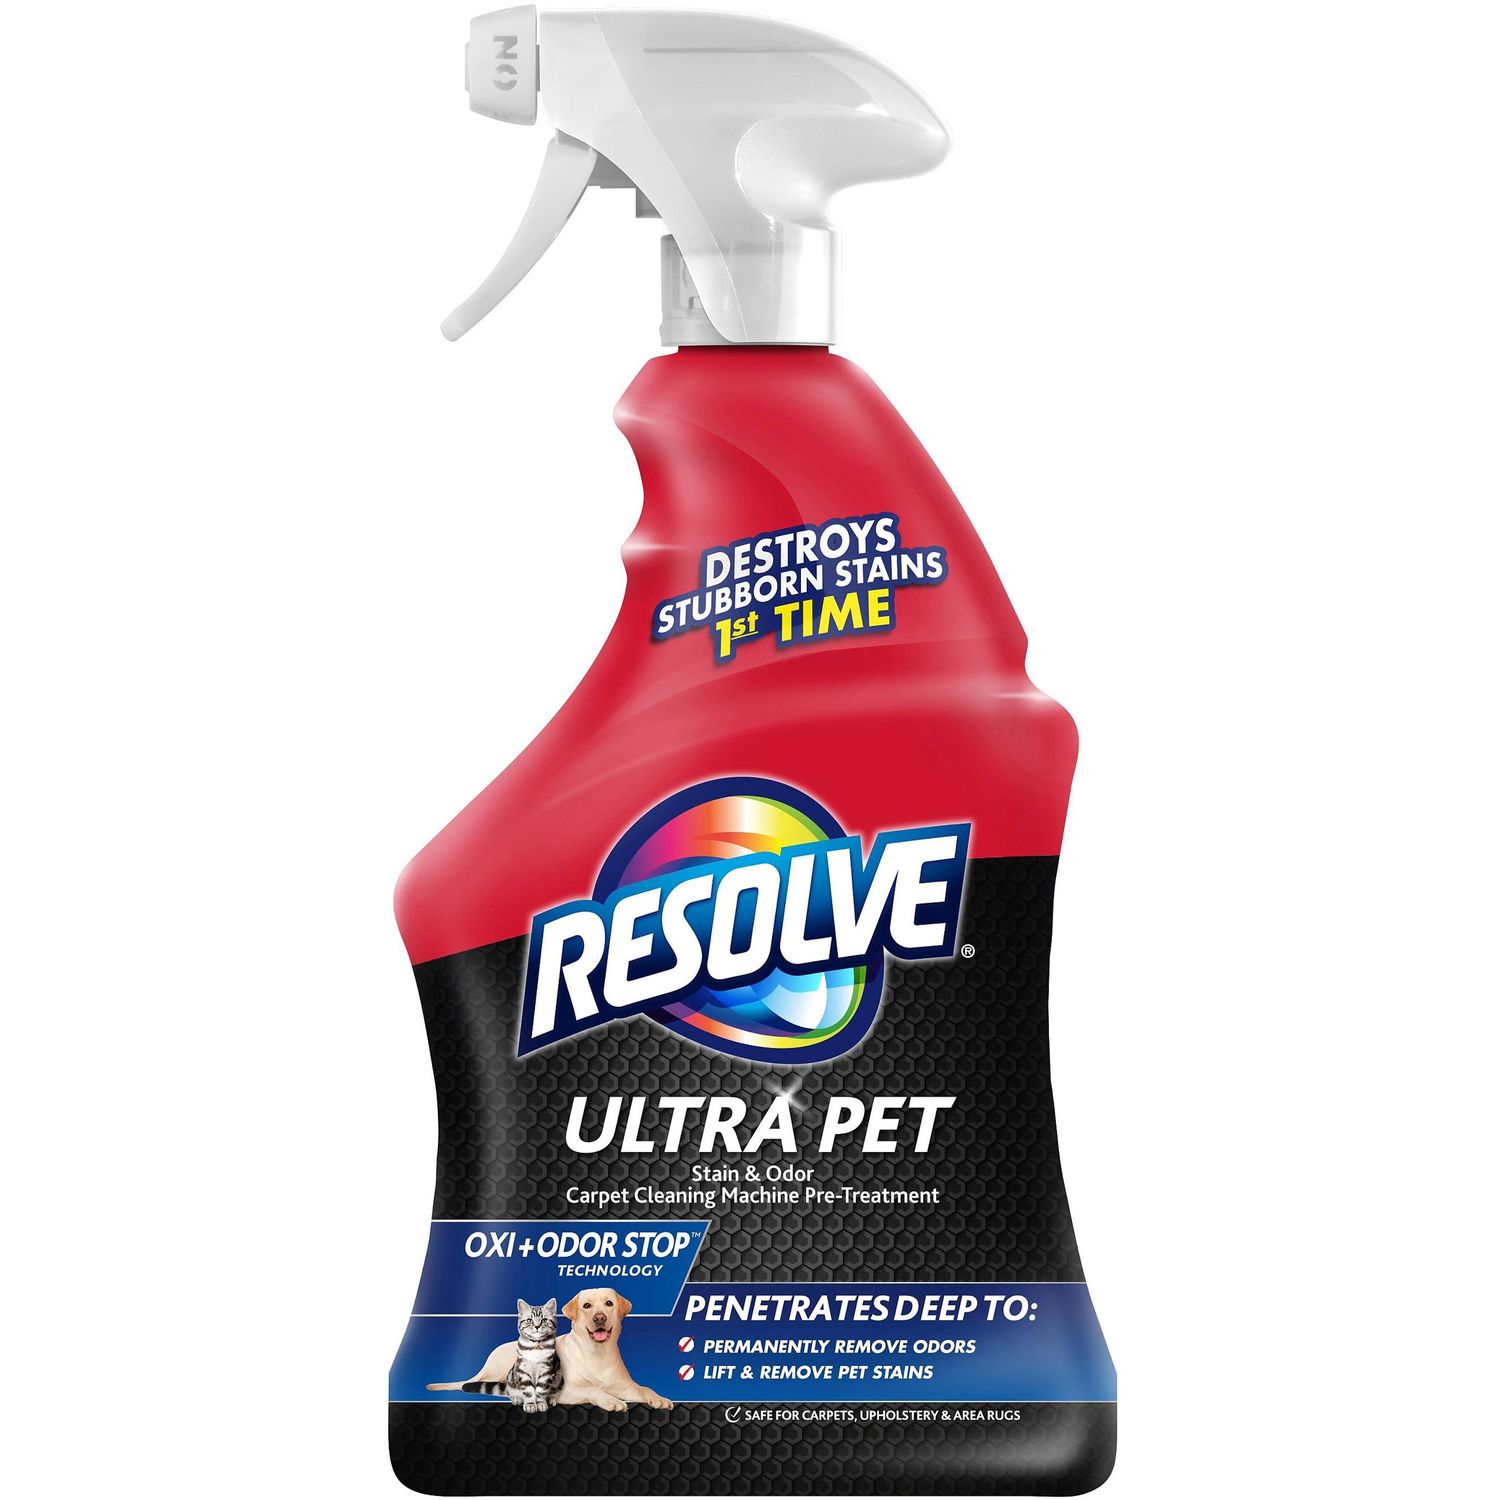 Ultra Stain/Odor Remover For Cat, Dog, Recommended for Stain Removal, Odor Removal, Urine Stain, Feces, Urine Smell, Vomit, Red Wine, Juice, Residue, Food Stain, 1 quart, 1